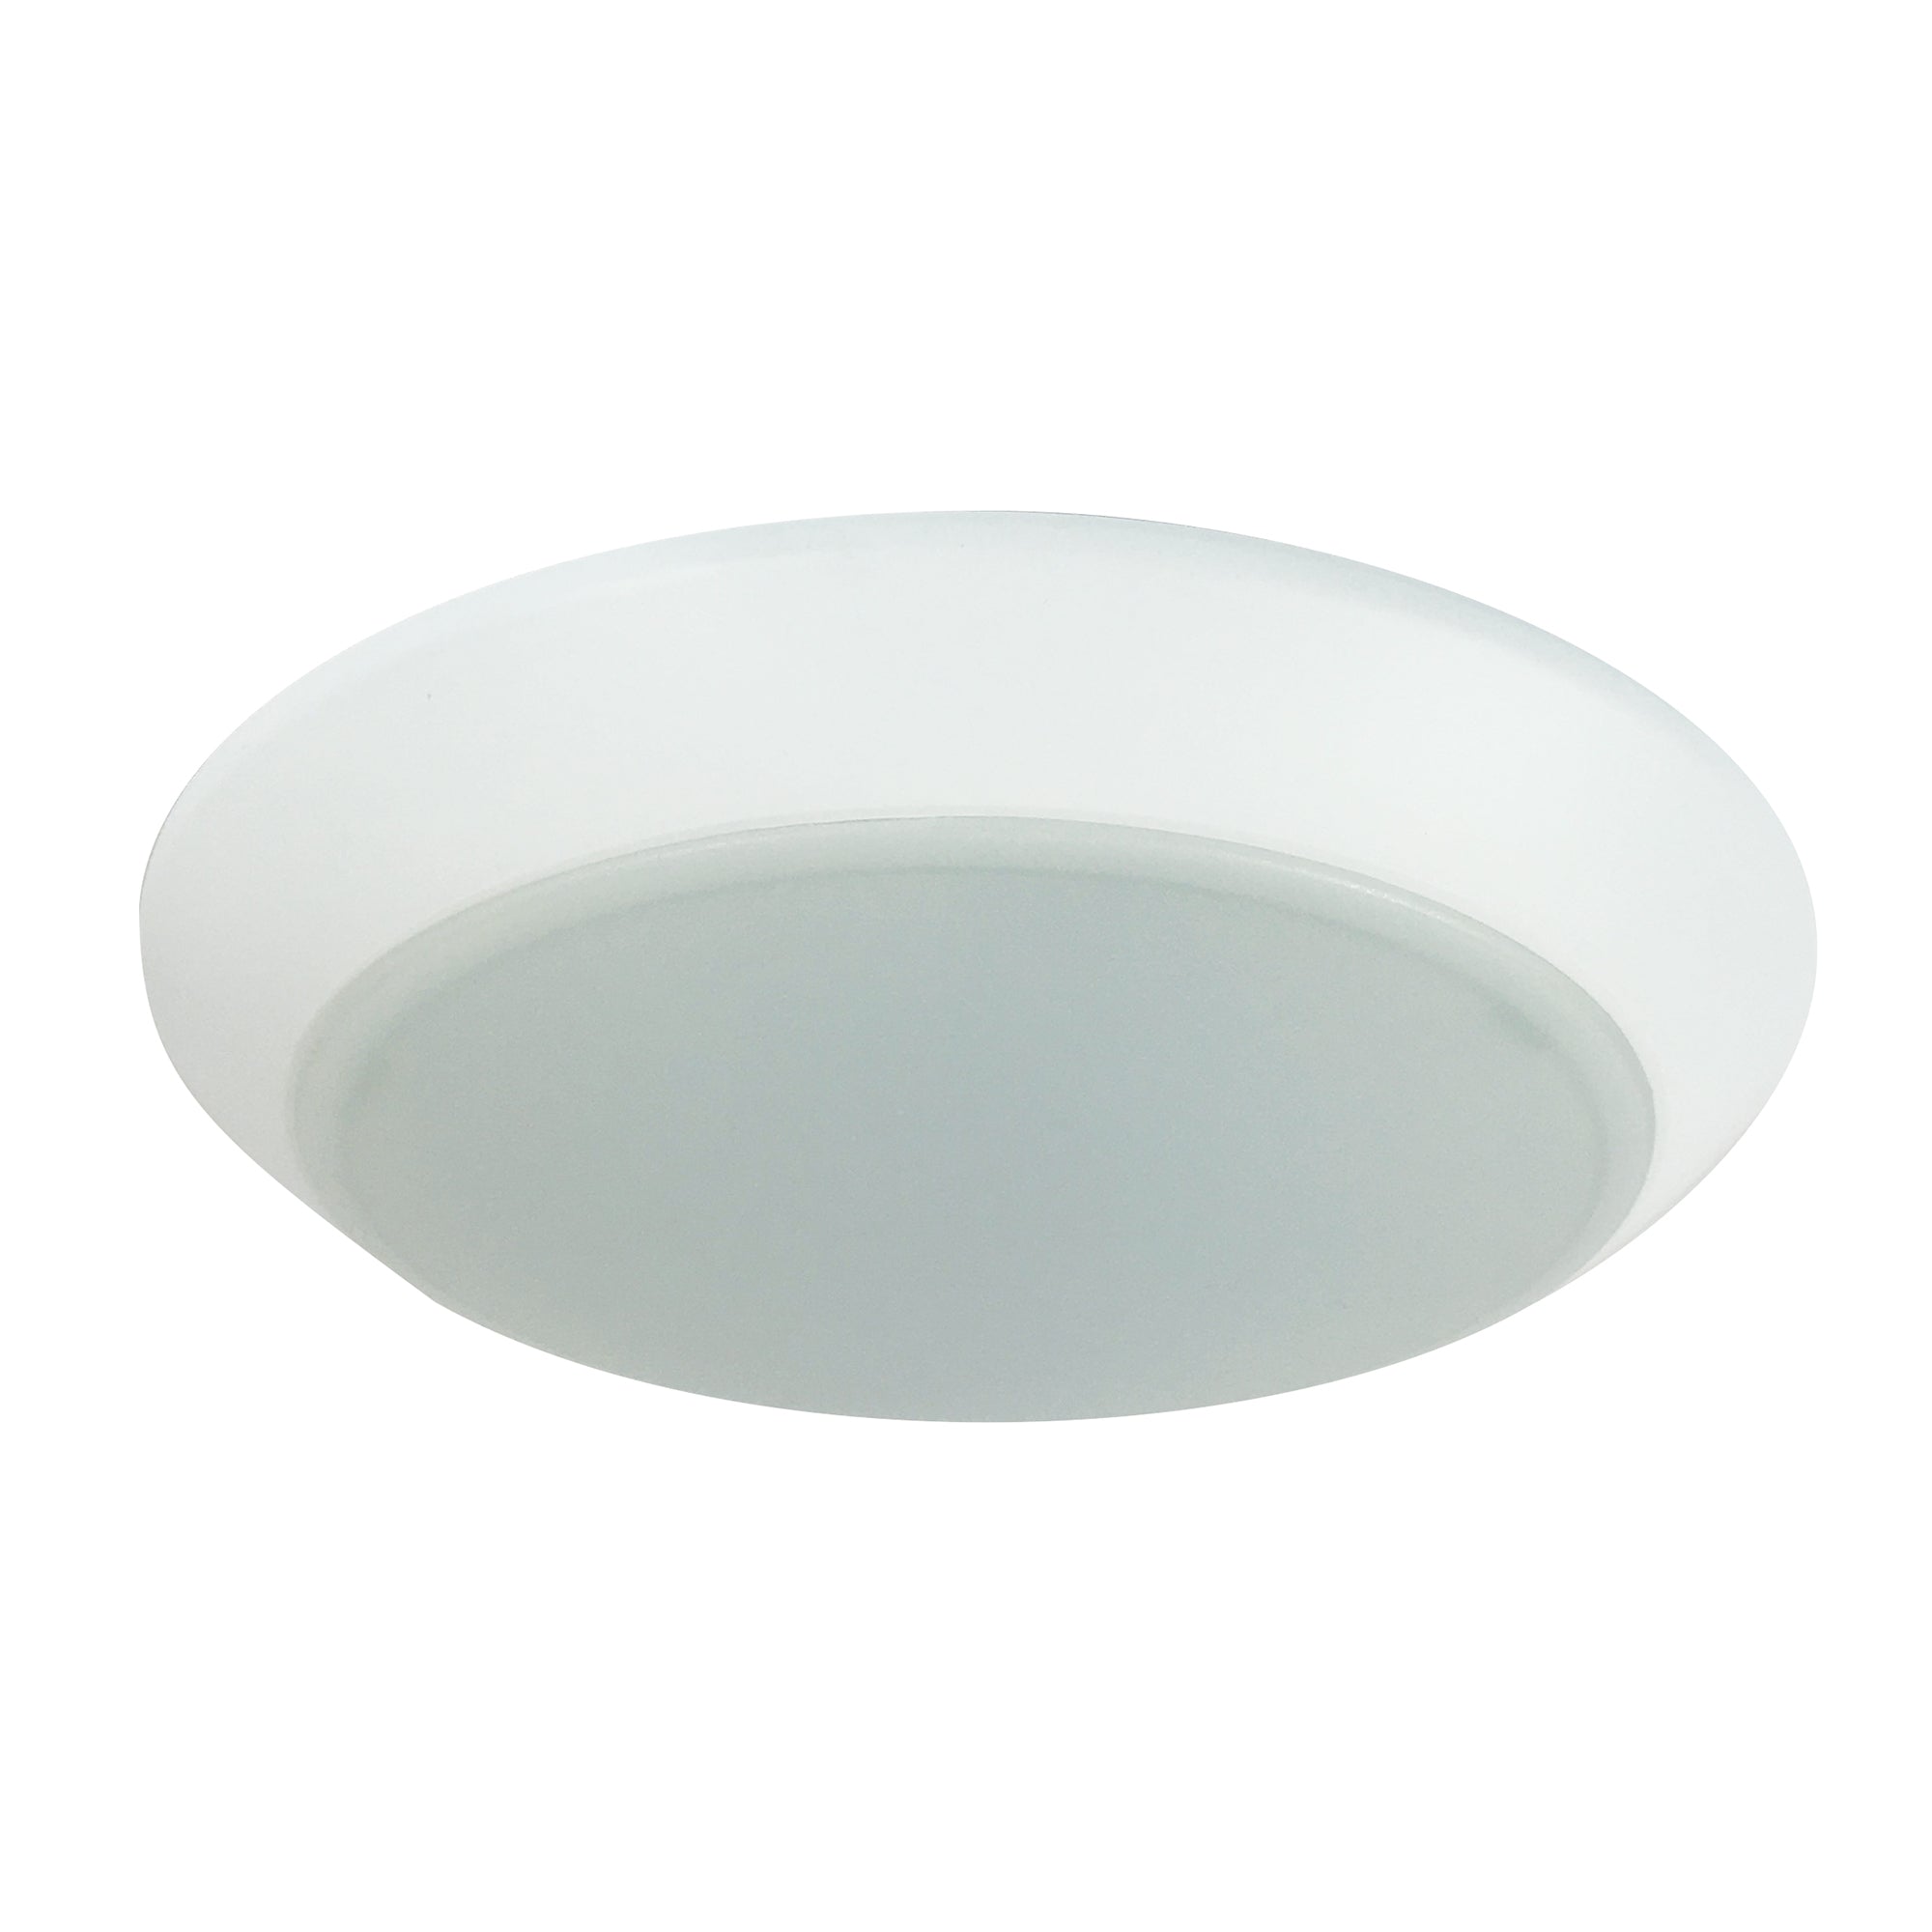 Nora Lighting NLOPAC-R8T2427W - Surface - 8 Inch AC Opal LED Surface Mount, 2150lm / 32W, 2700K, White finish